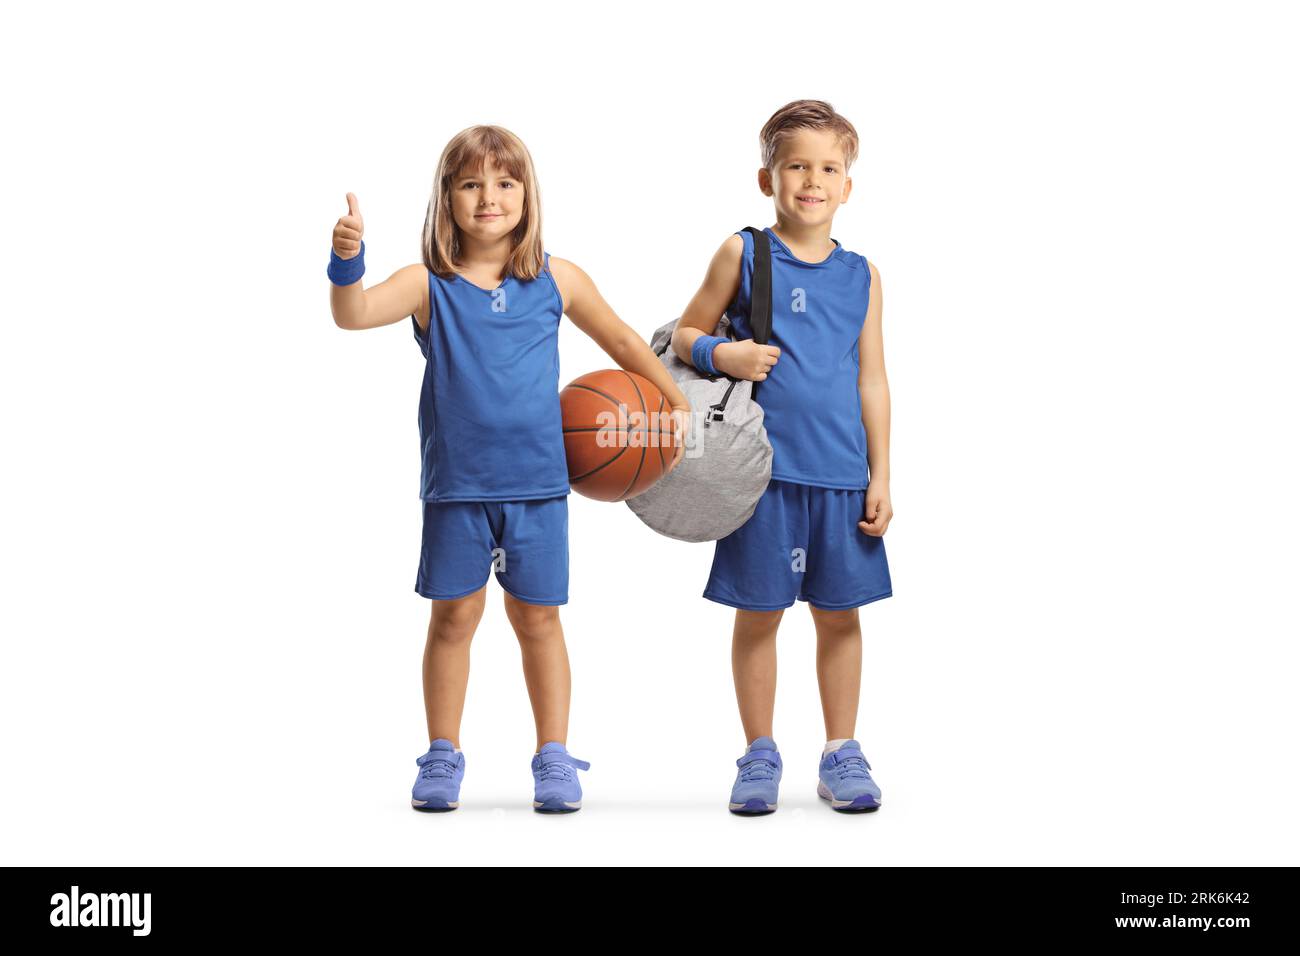 GIrl and boy in sport jerseys holding a basketball and gesturing thumbs up isolated on white background Stock Photo